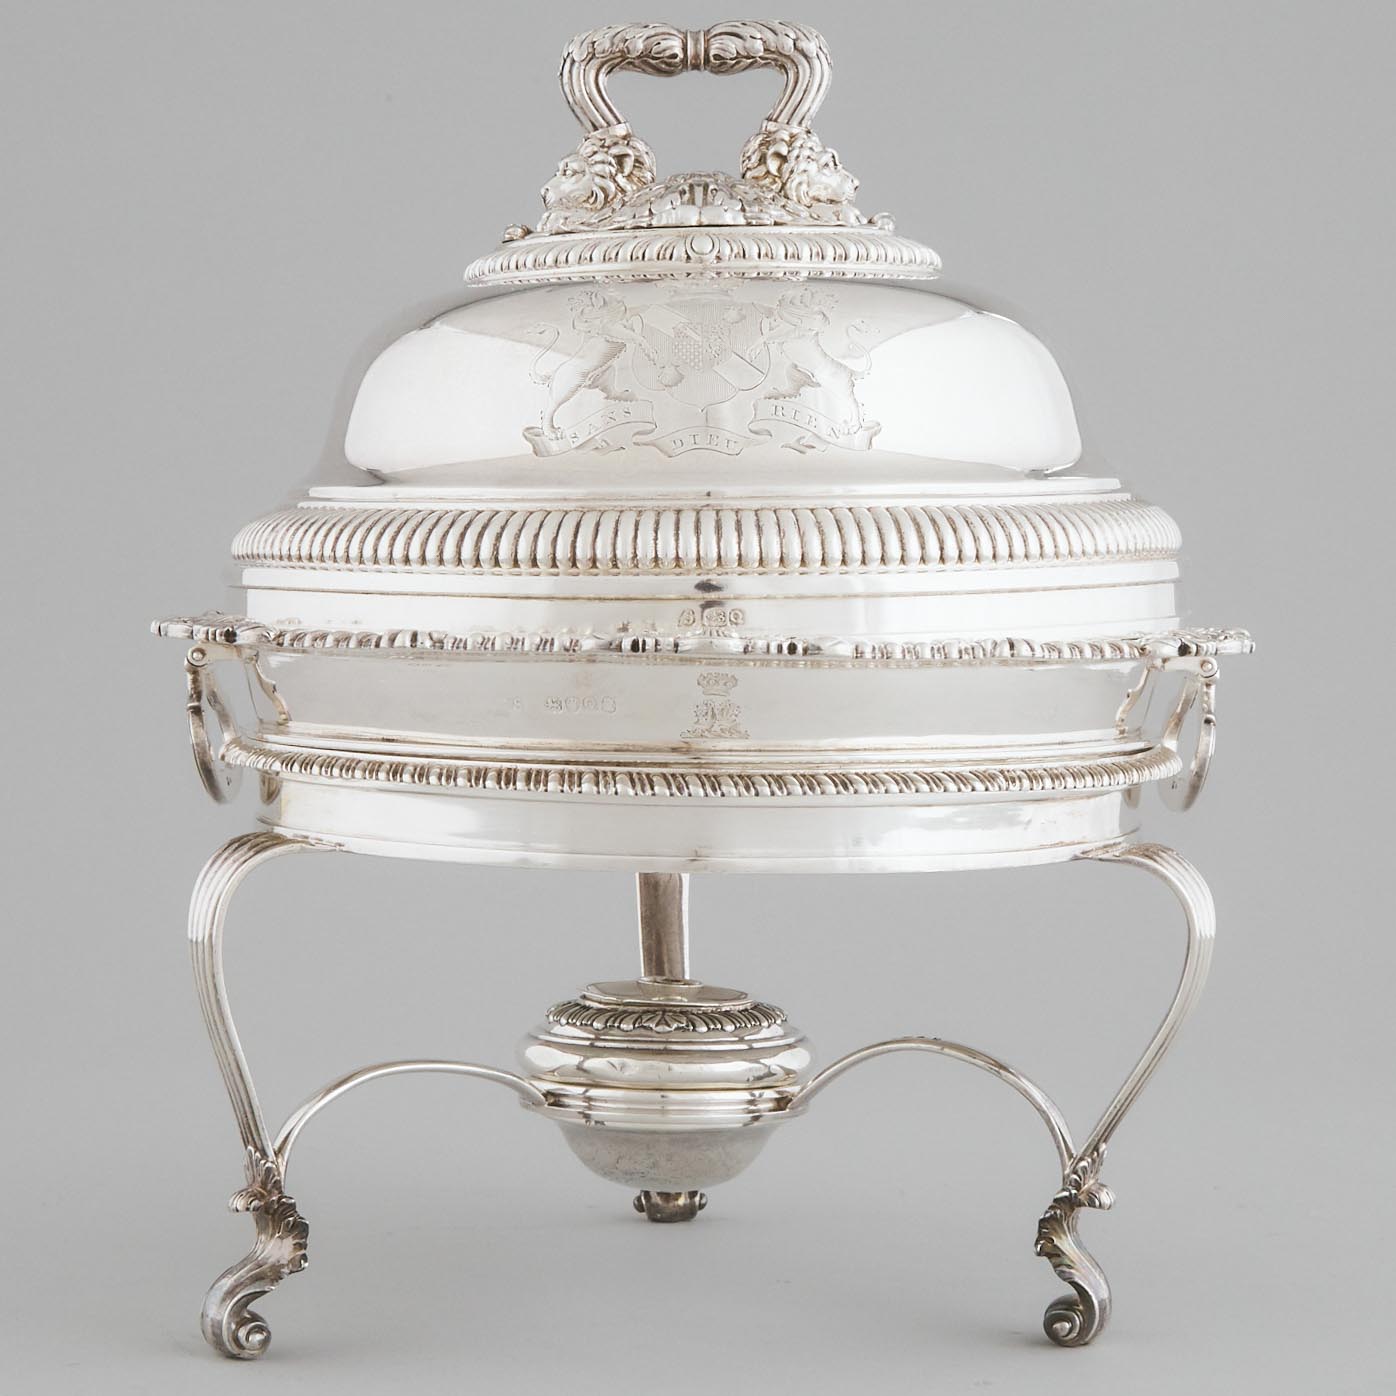 George III Silver Covered Entrée Dish, Paul Storr, London, 1811, and a Warming Stand with Burner, William Stroud, London, 1809